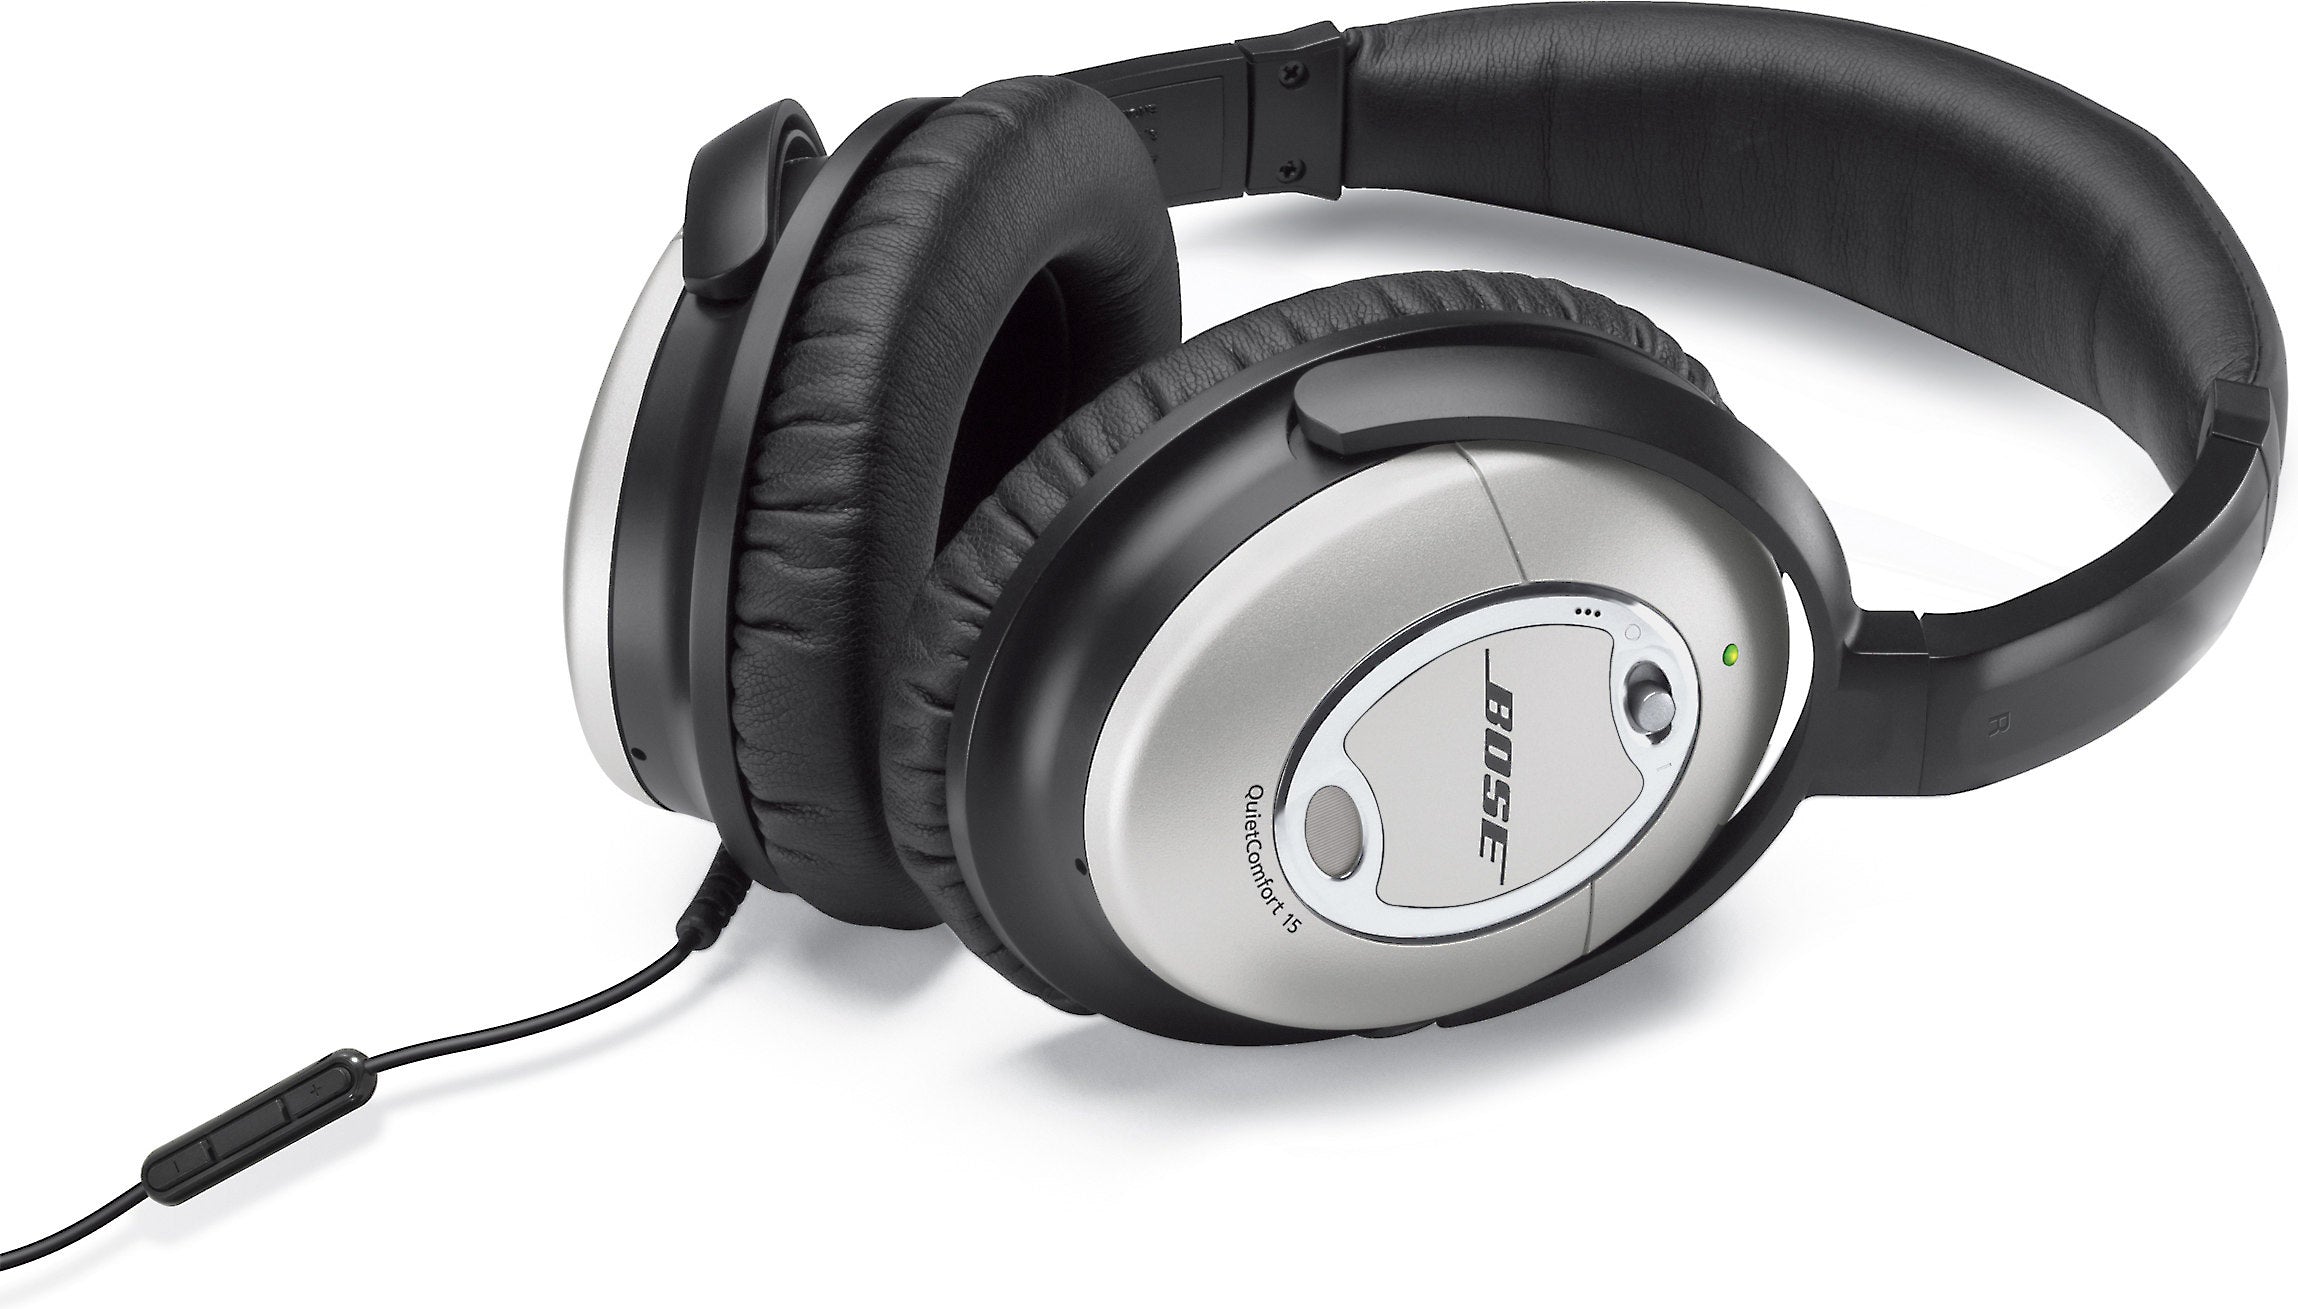 Bose QuietComfort 15 QC15 Acoustic Noise Cancelling Headphones (Refurbished) - CentralSound